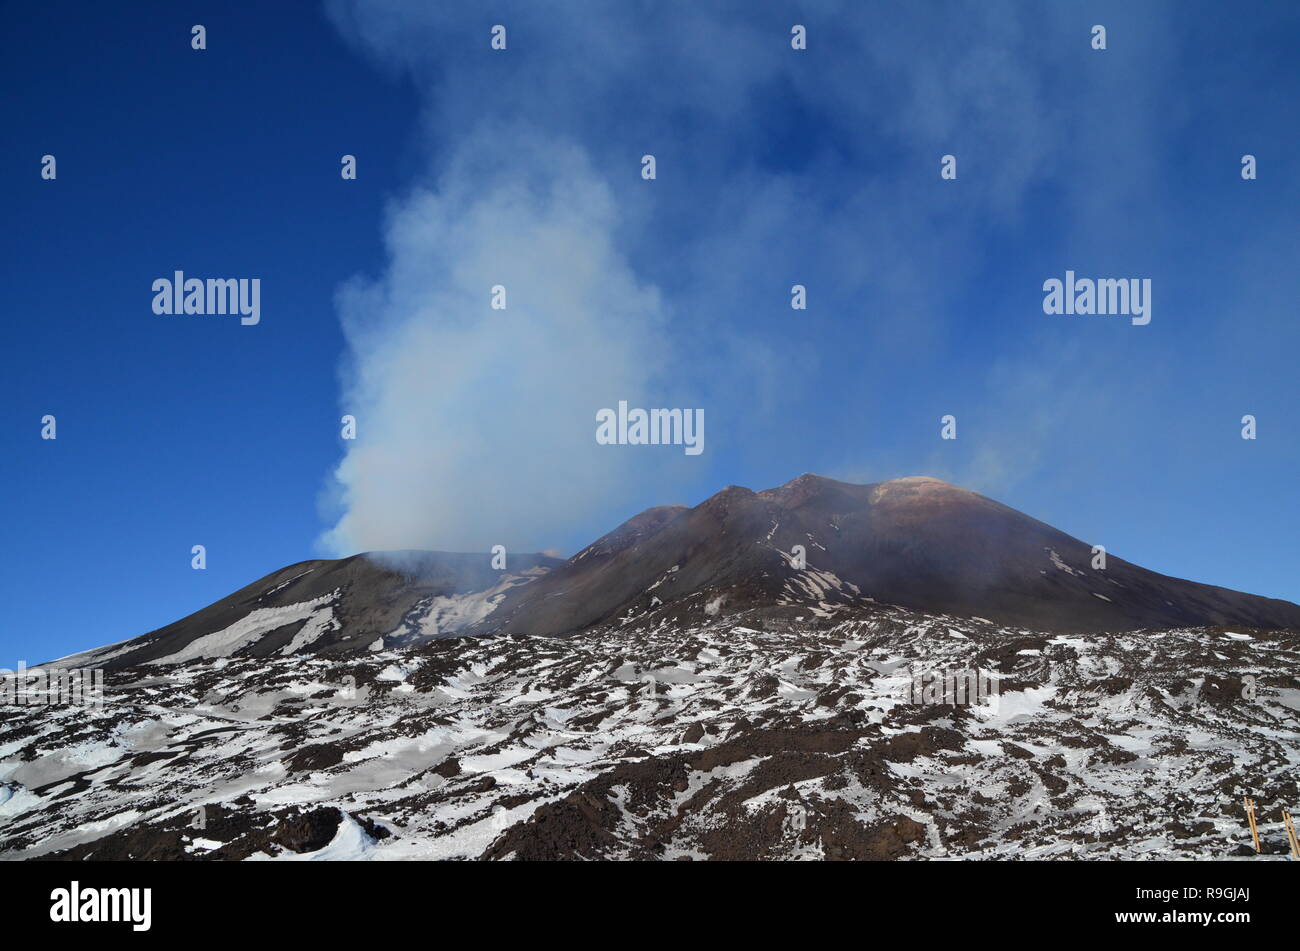 Catania, Sicily, Italy. 23th December, 2018. Tourists visit Europe's most active volcano, Mount Etna, a day before it erupts. Credit: jbdodane/Alamy Live News Stock Photo